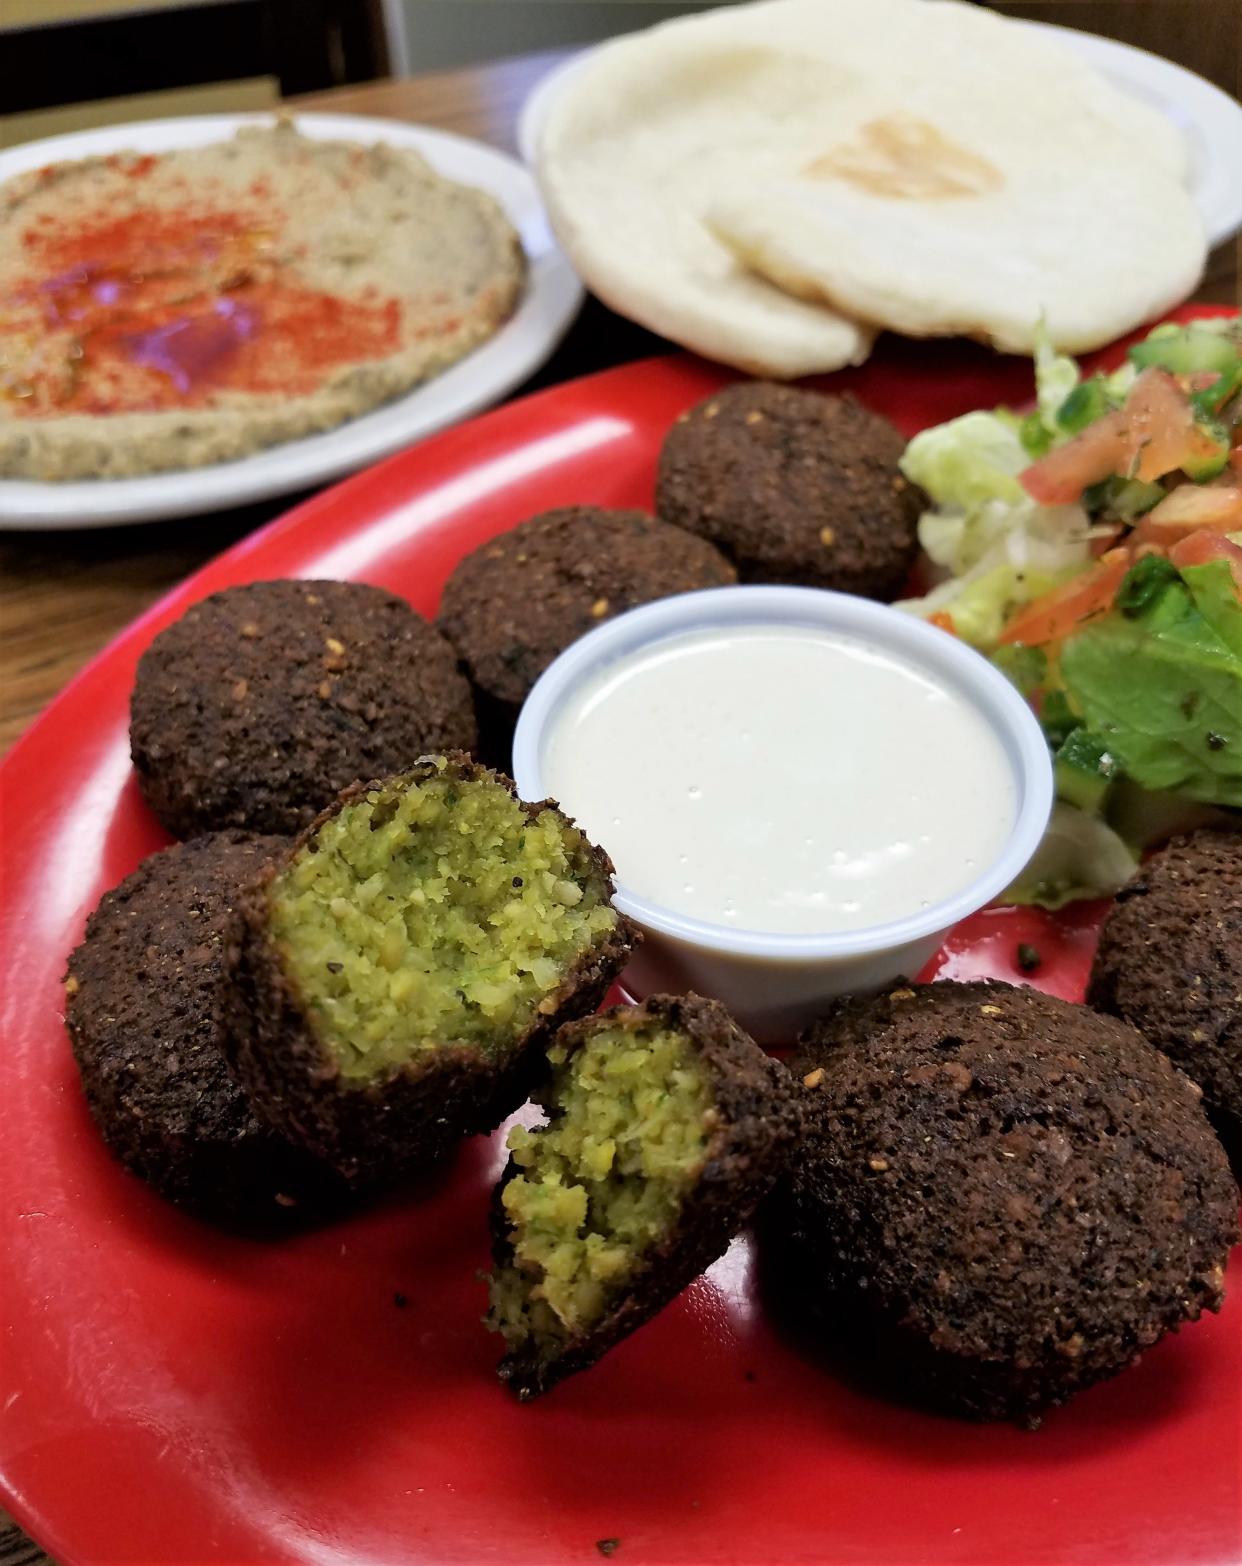 Falafel at Manna Mediterranean Grill are served with tahini sauce, pita bread and a side of your choice. We like the refreshing Mediterranean salad.